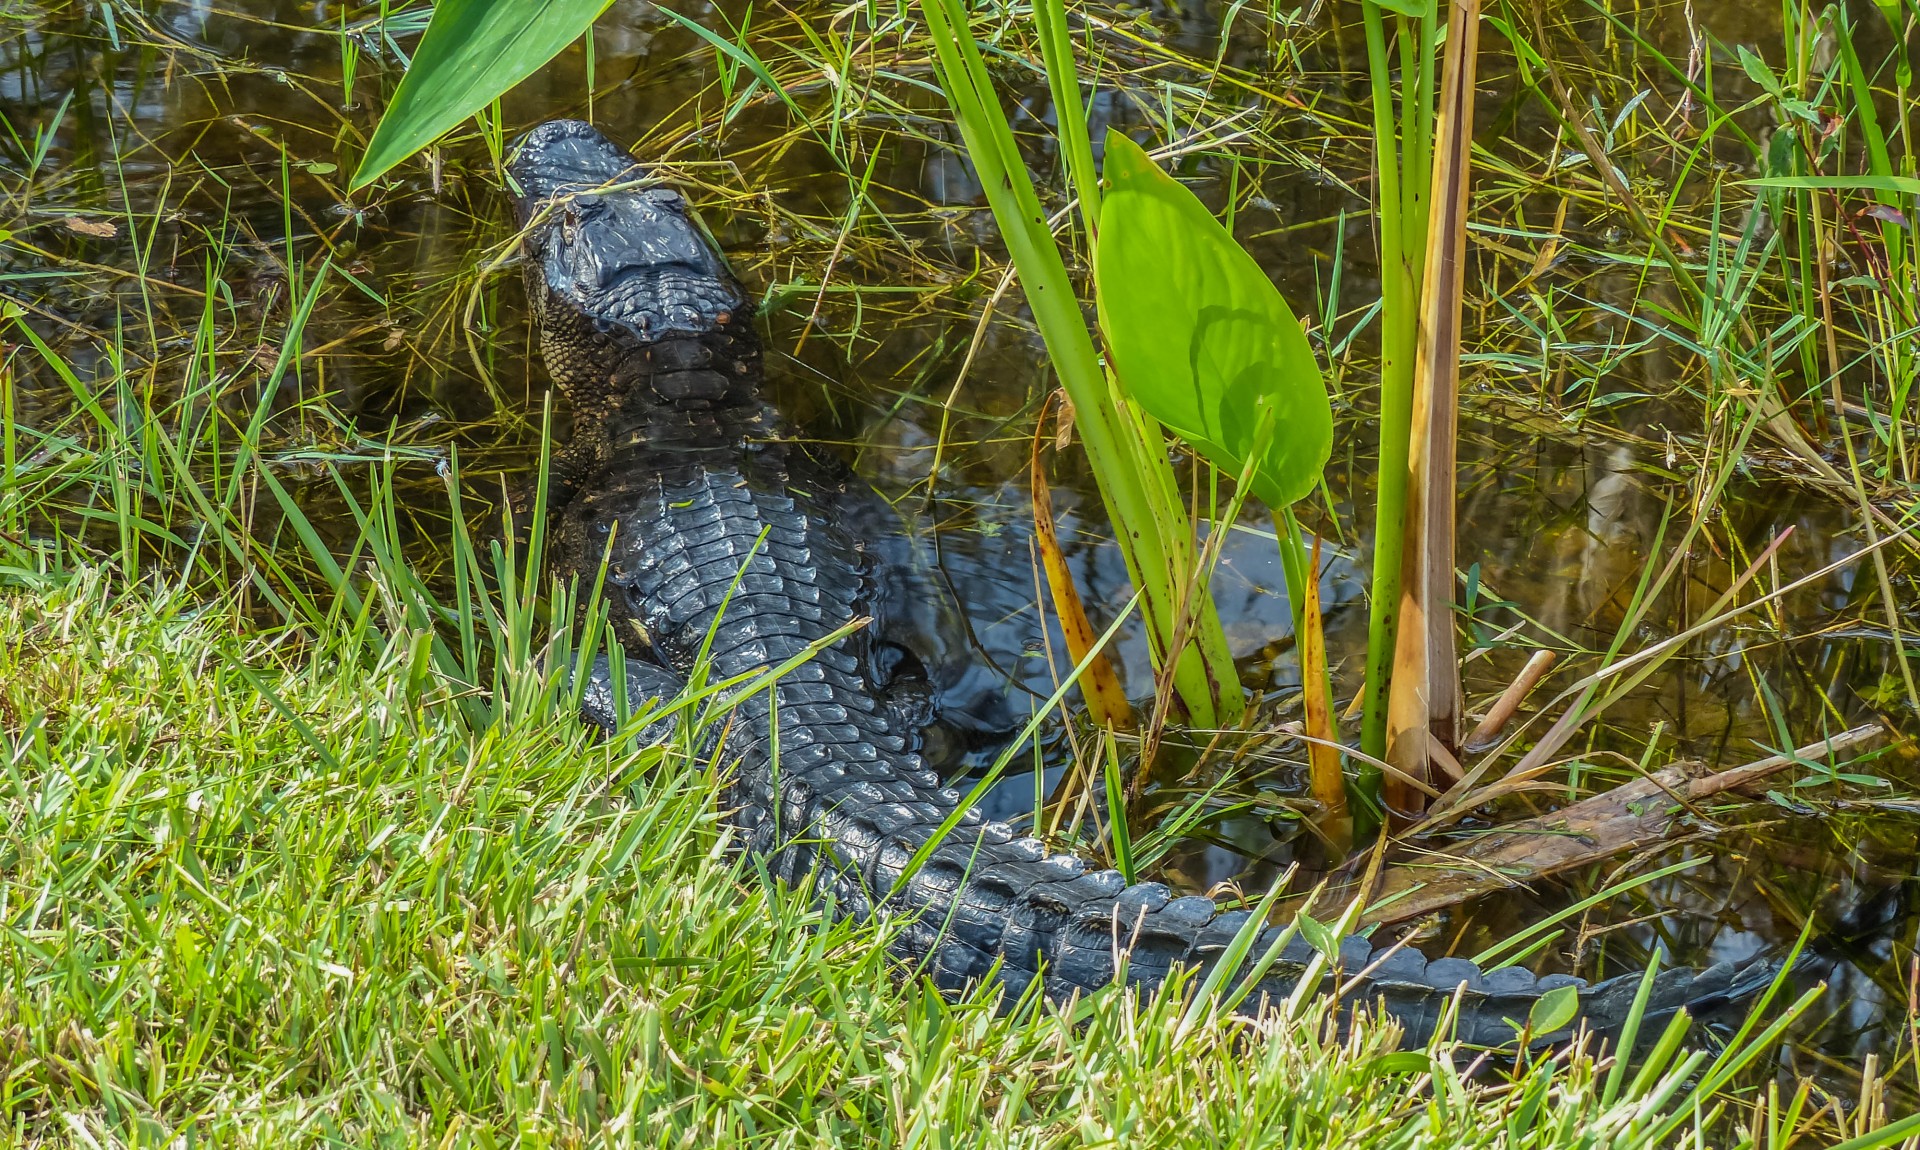 Young Alligator